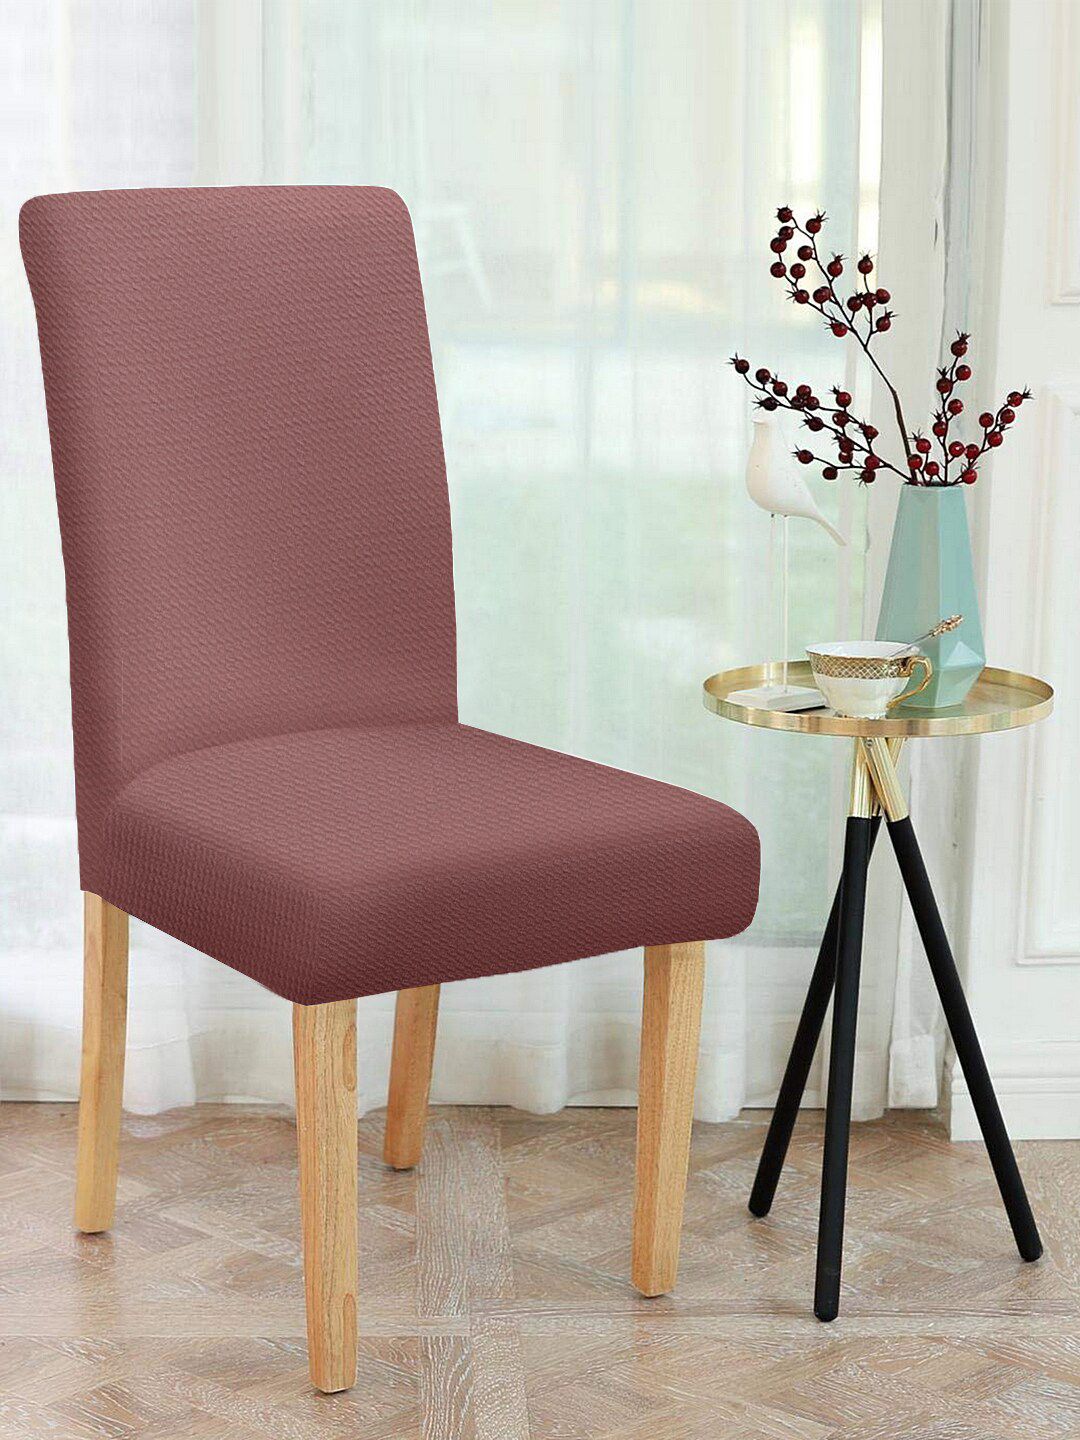 Cortina Set Of 4 Mauve Self Design Chair Covers Price in India